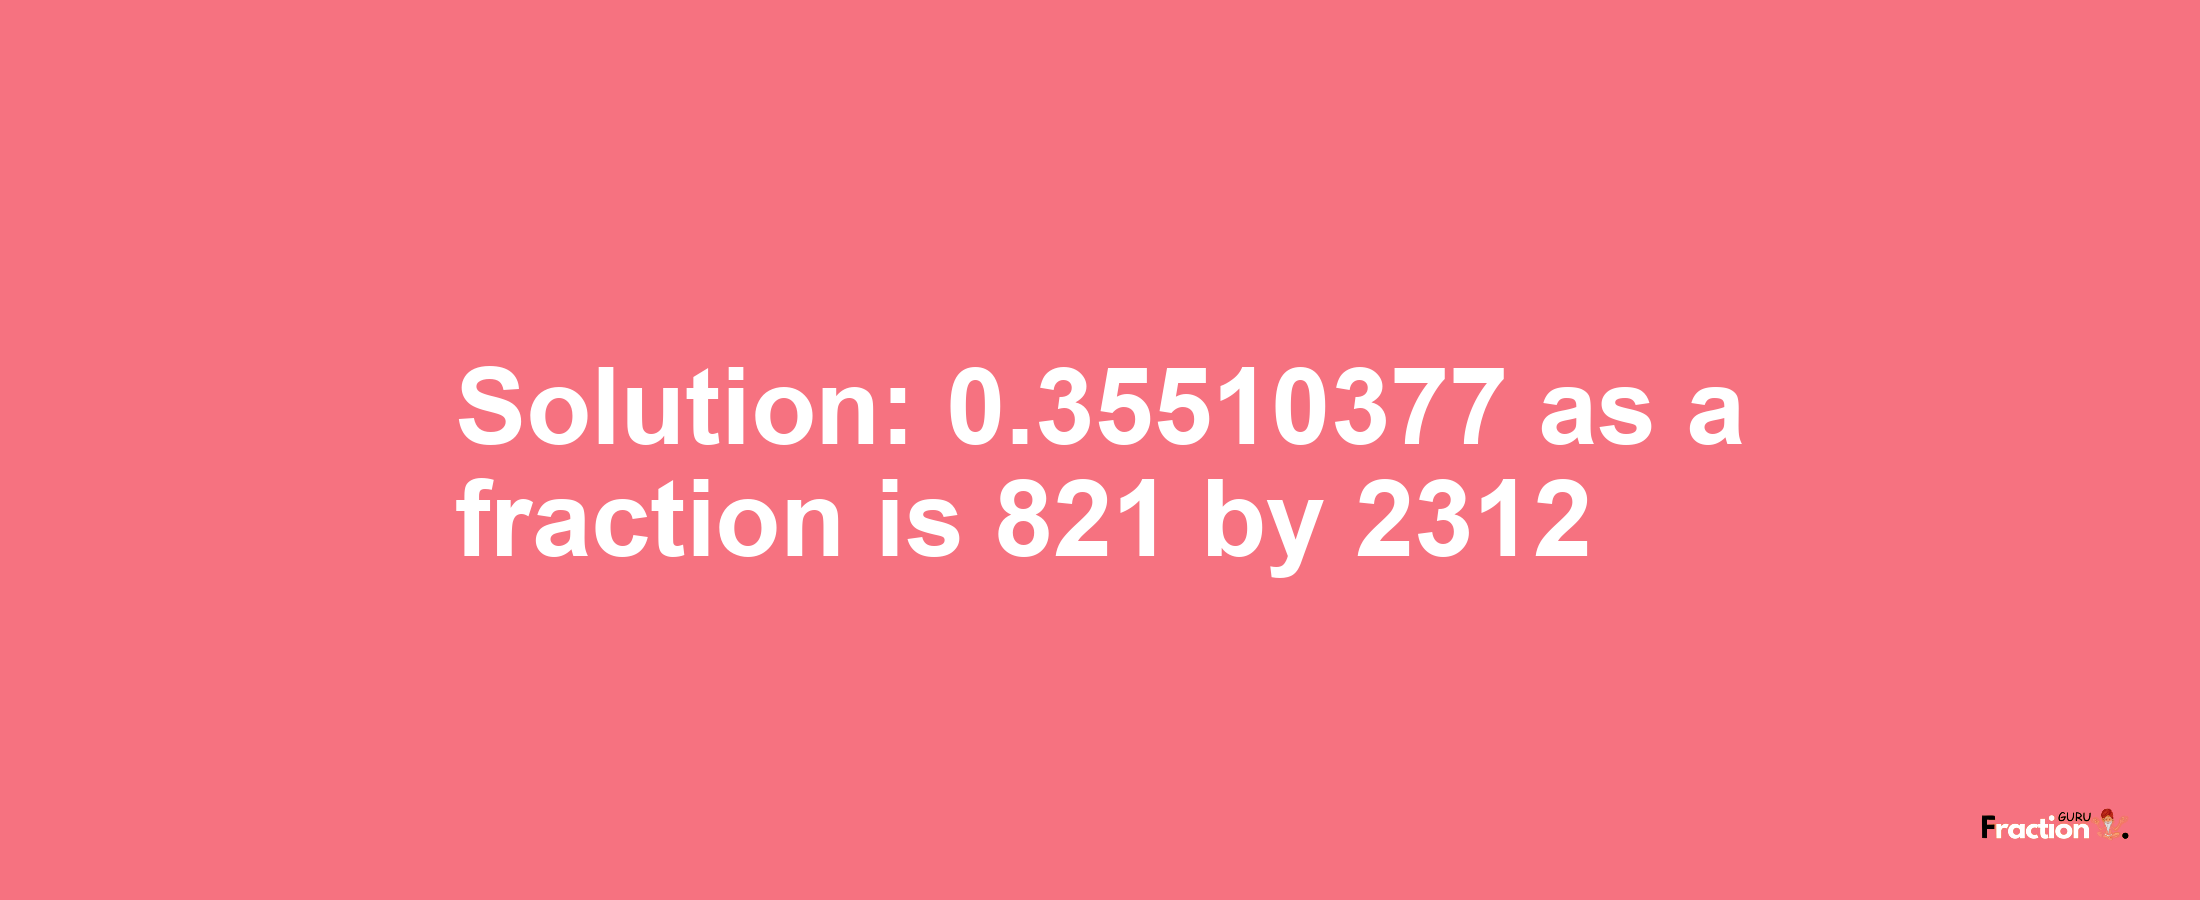 Solution:0.35510377 as a fraction is 821/2312